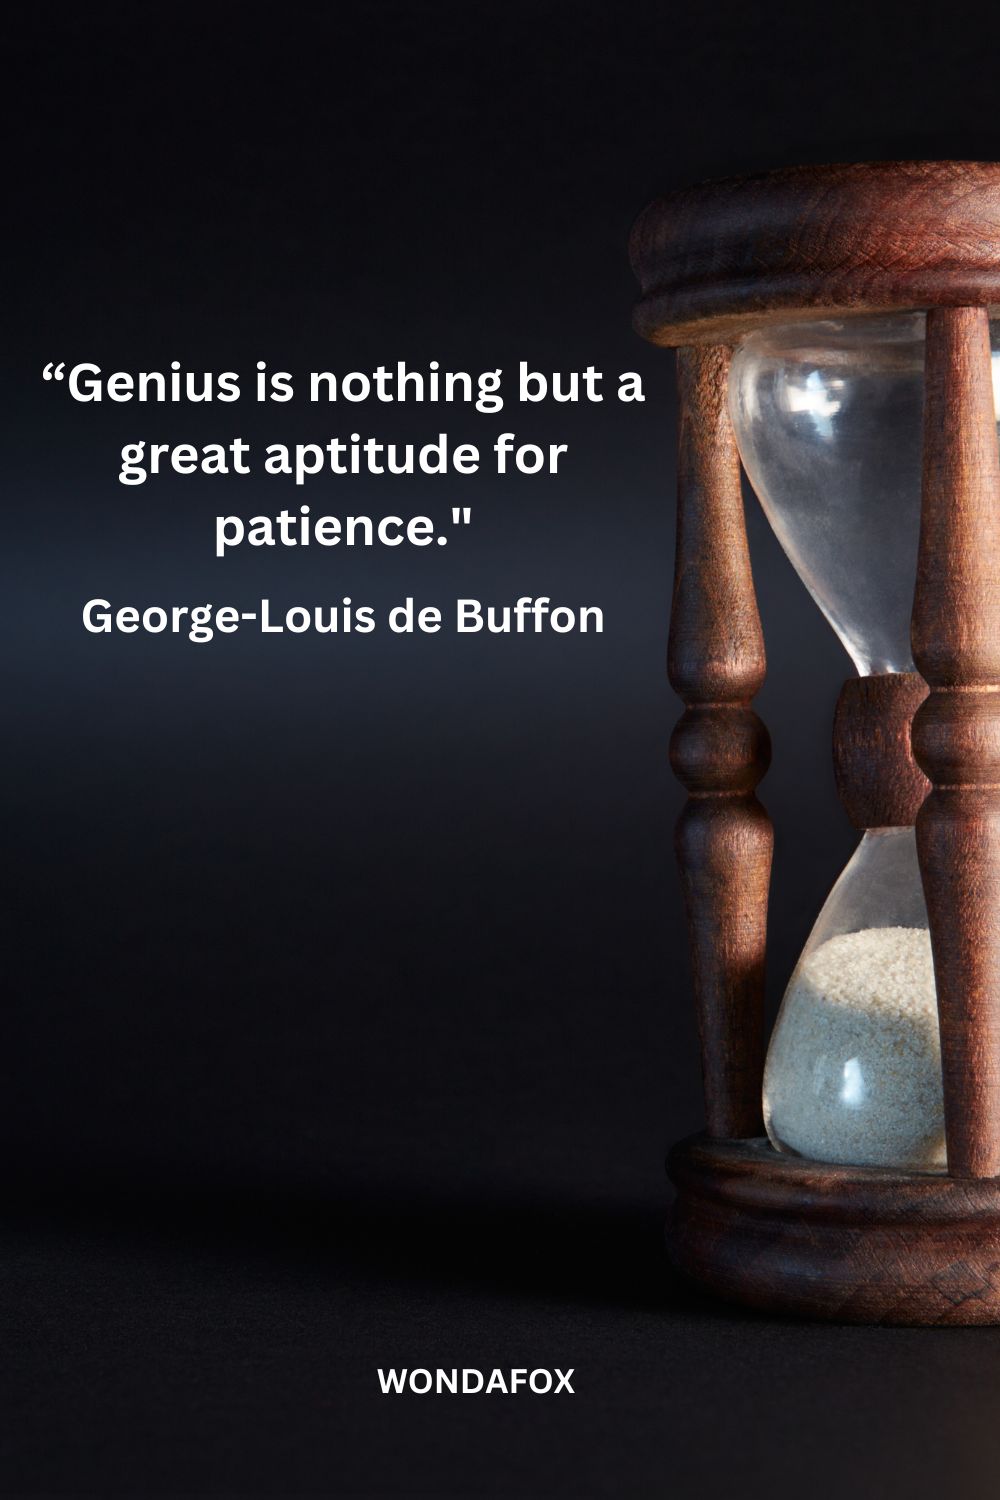 “Genius is nothing but a great aptitude for patience."
George-Louis de Buffon